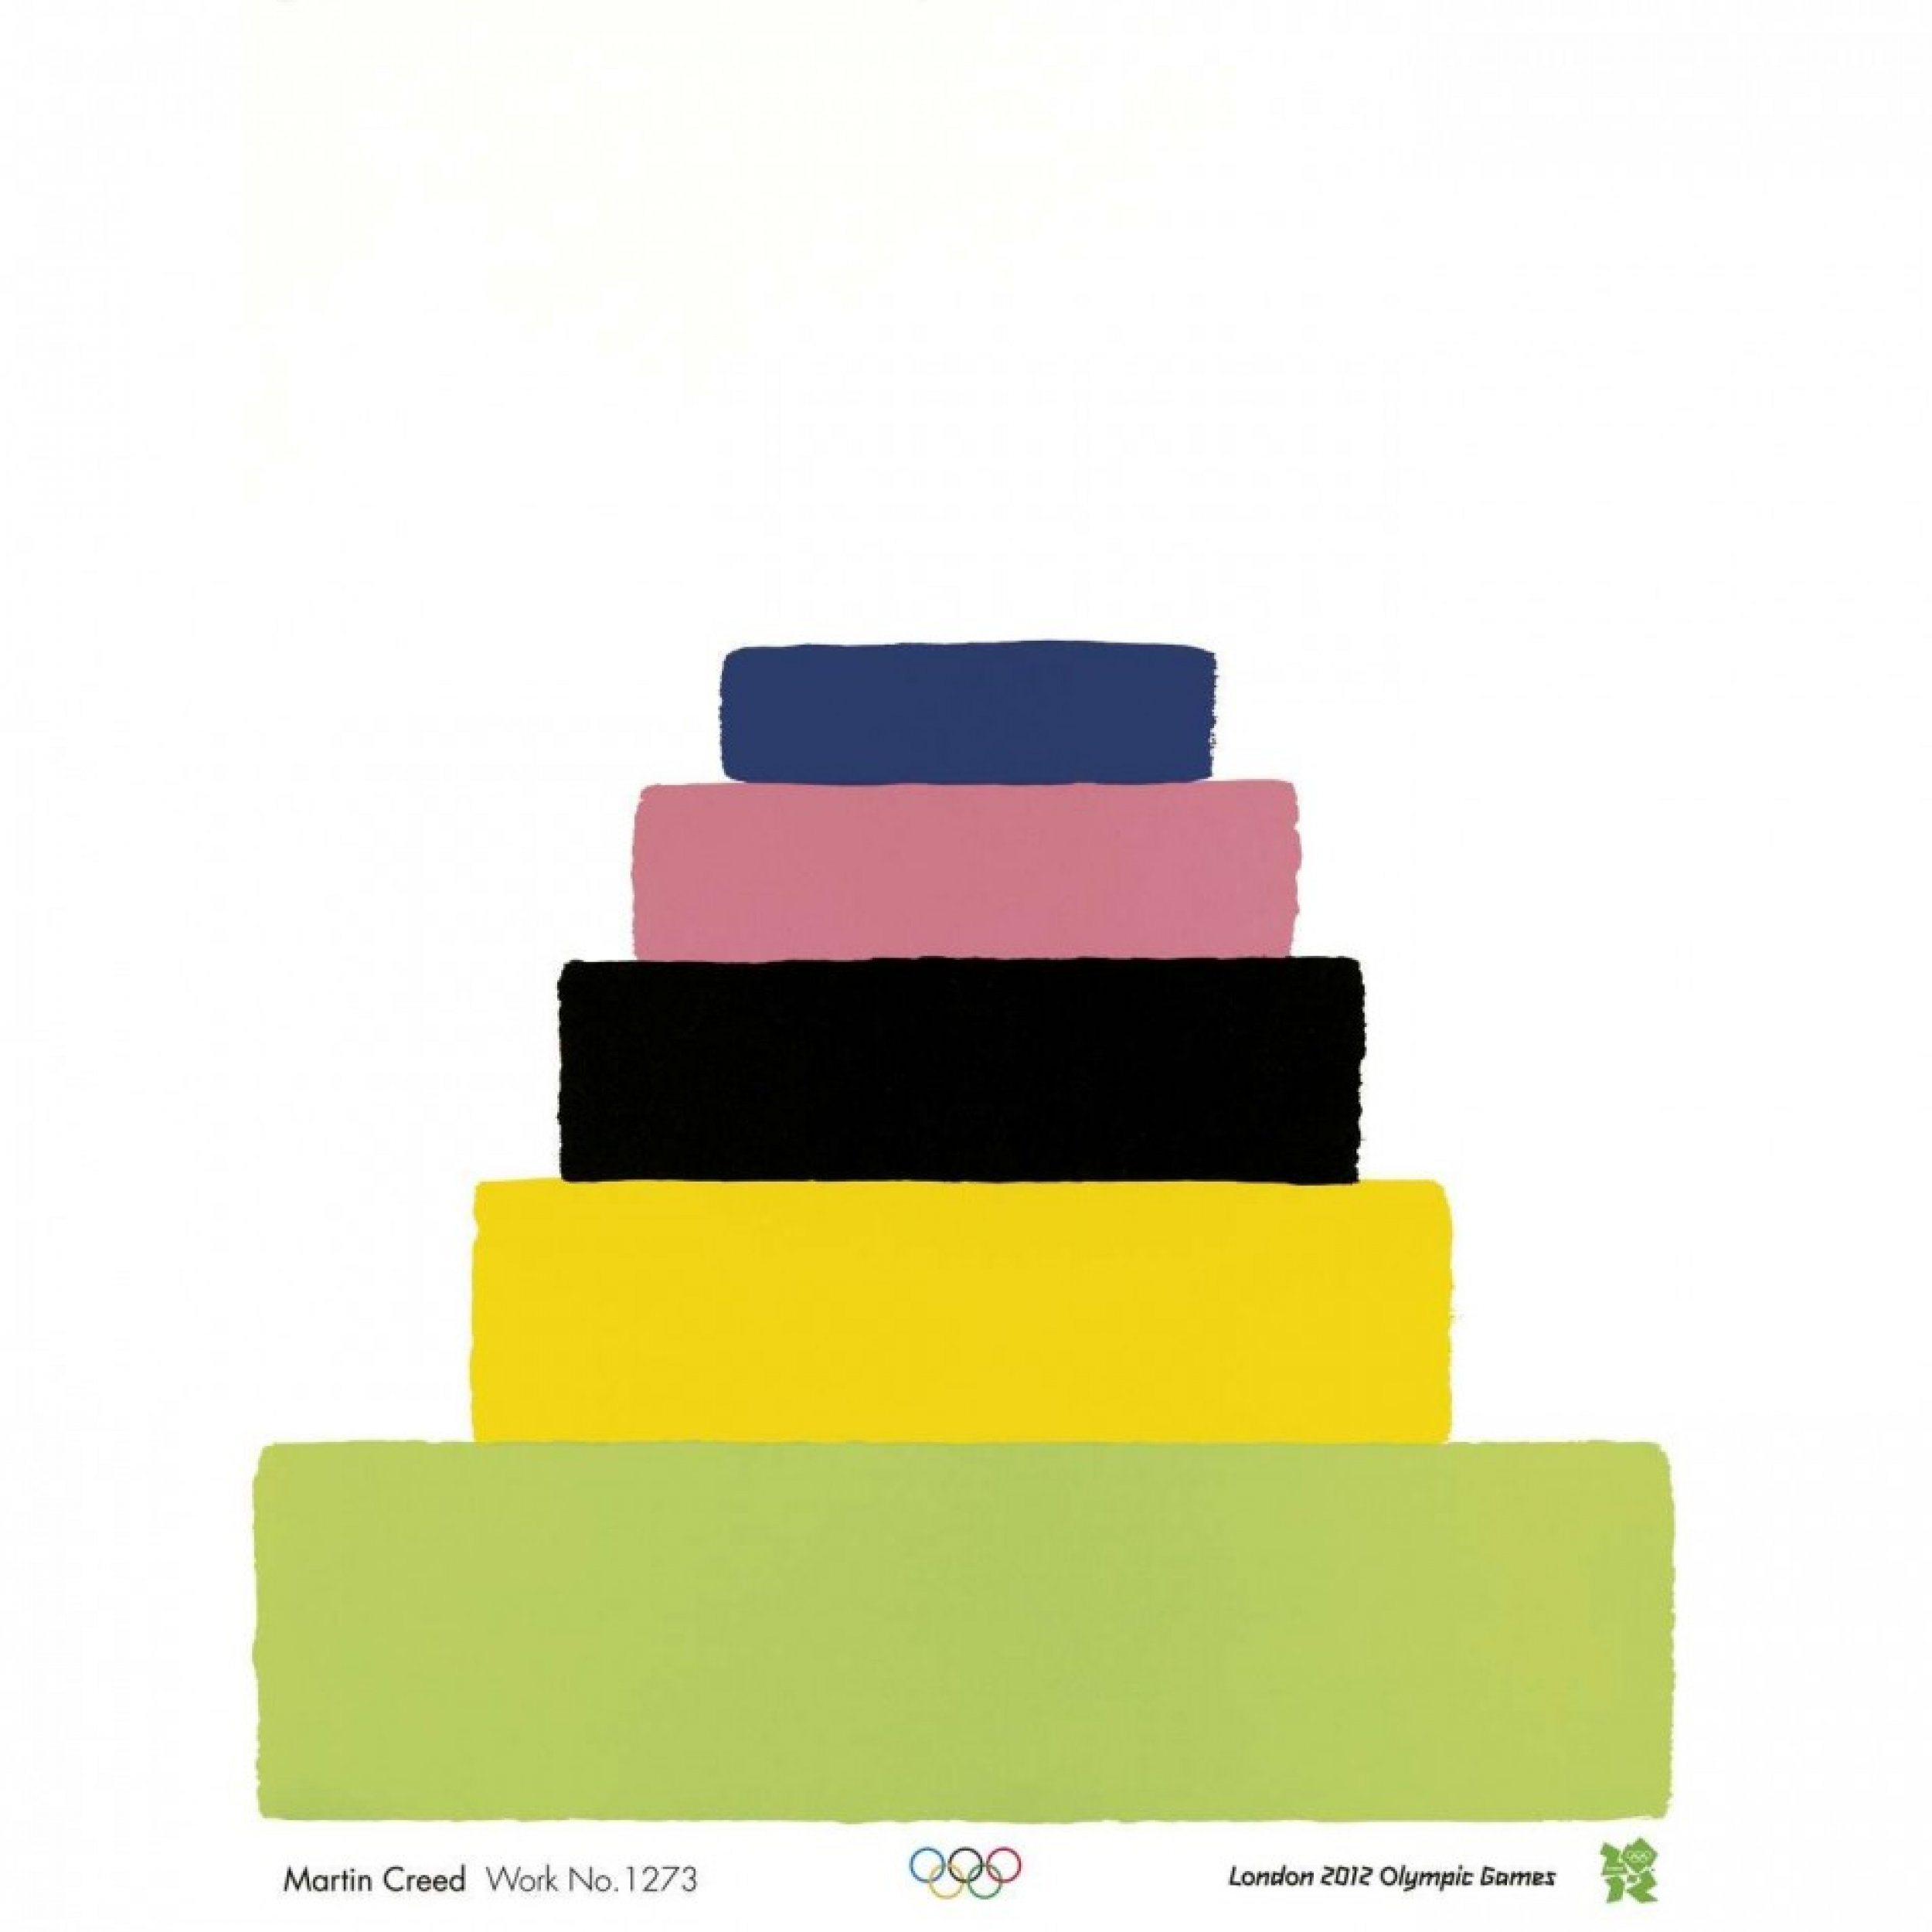 London 2012 official poster